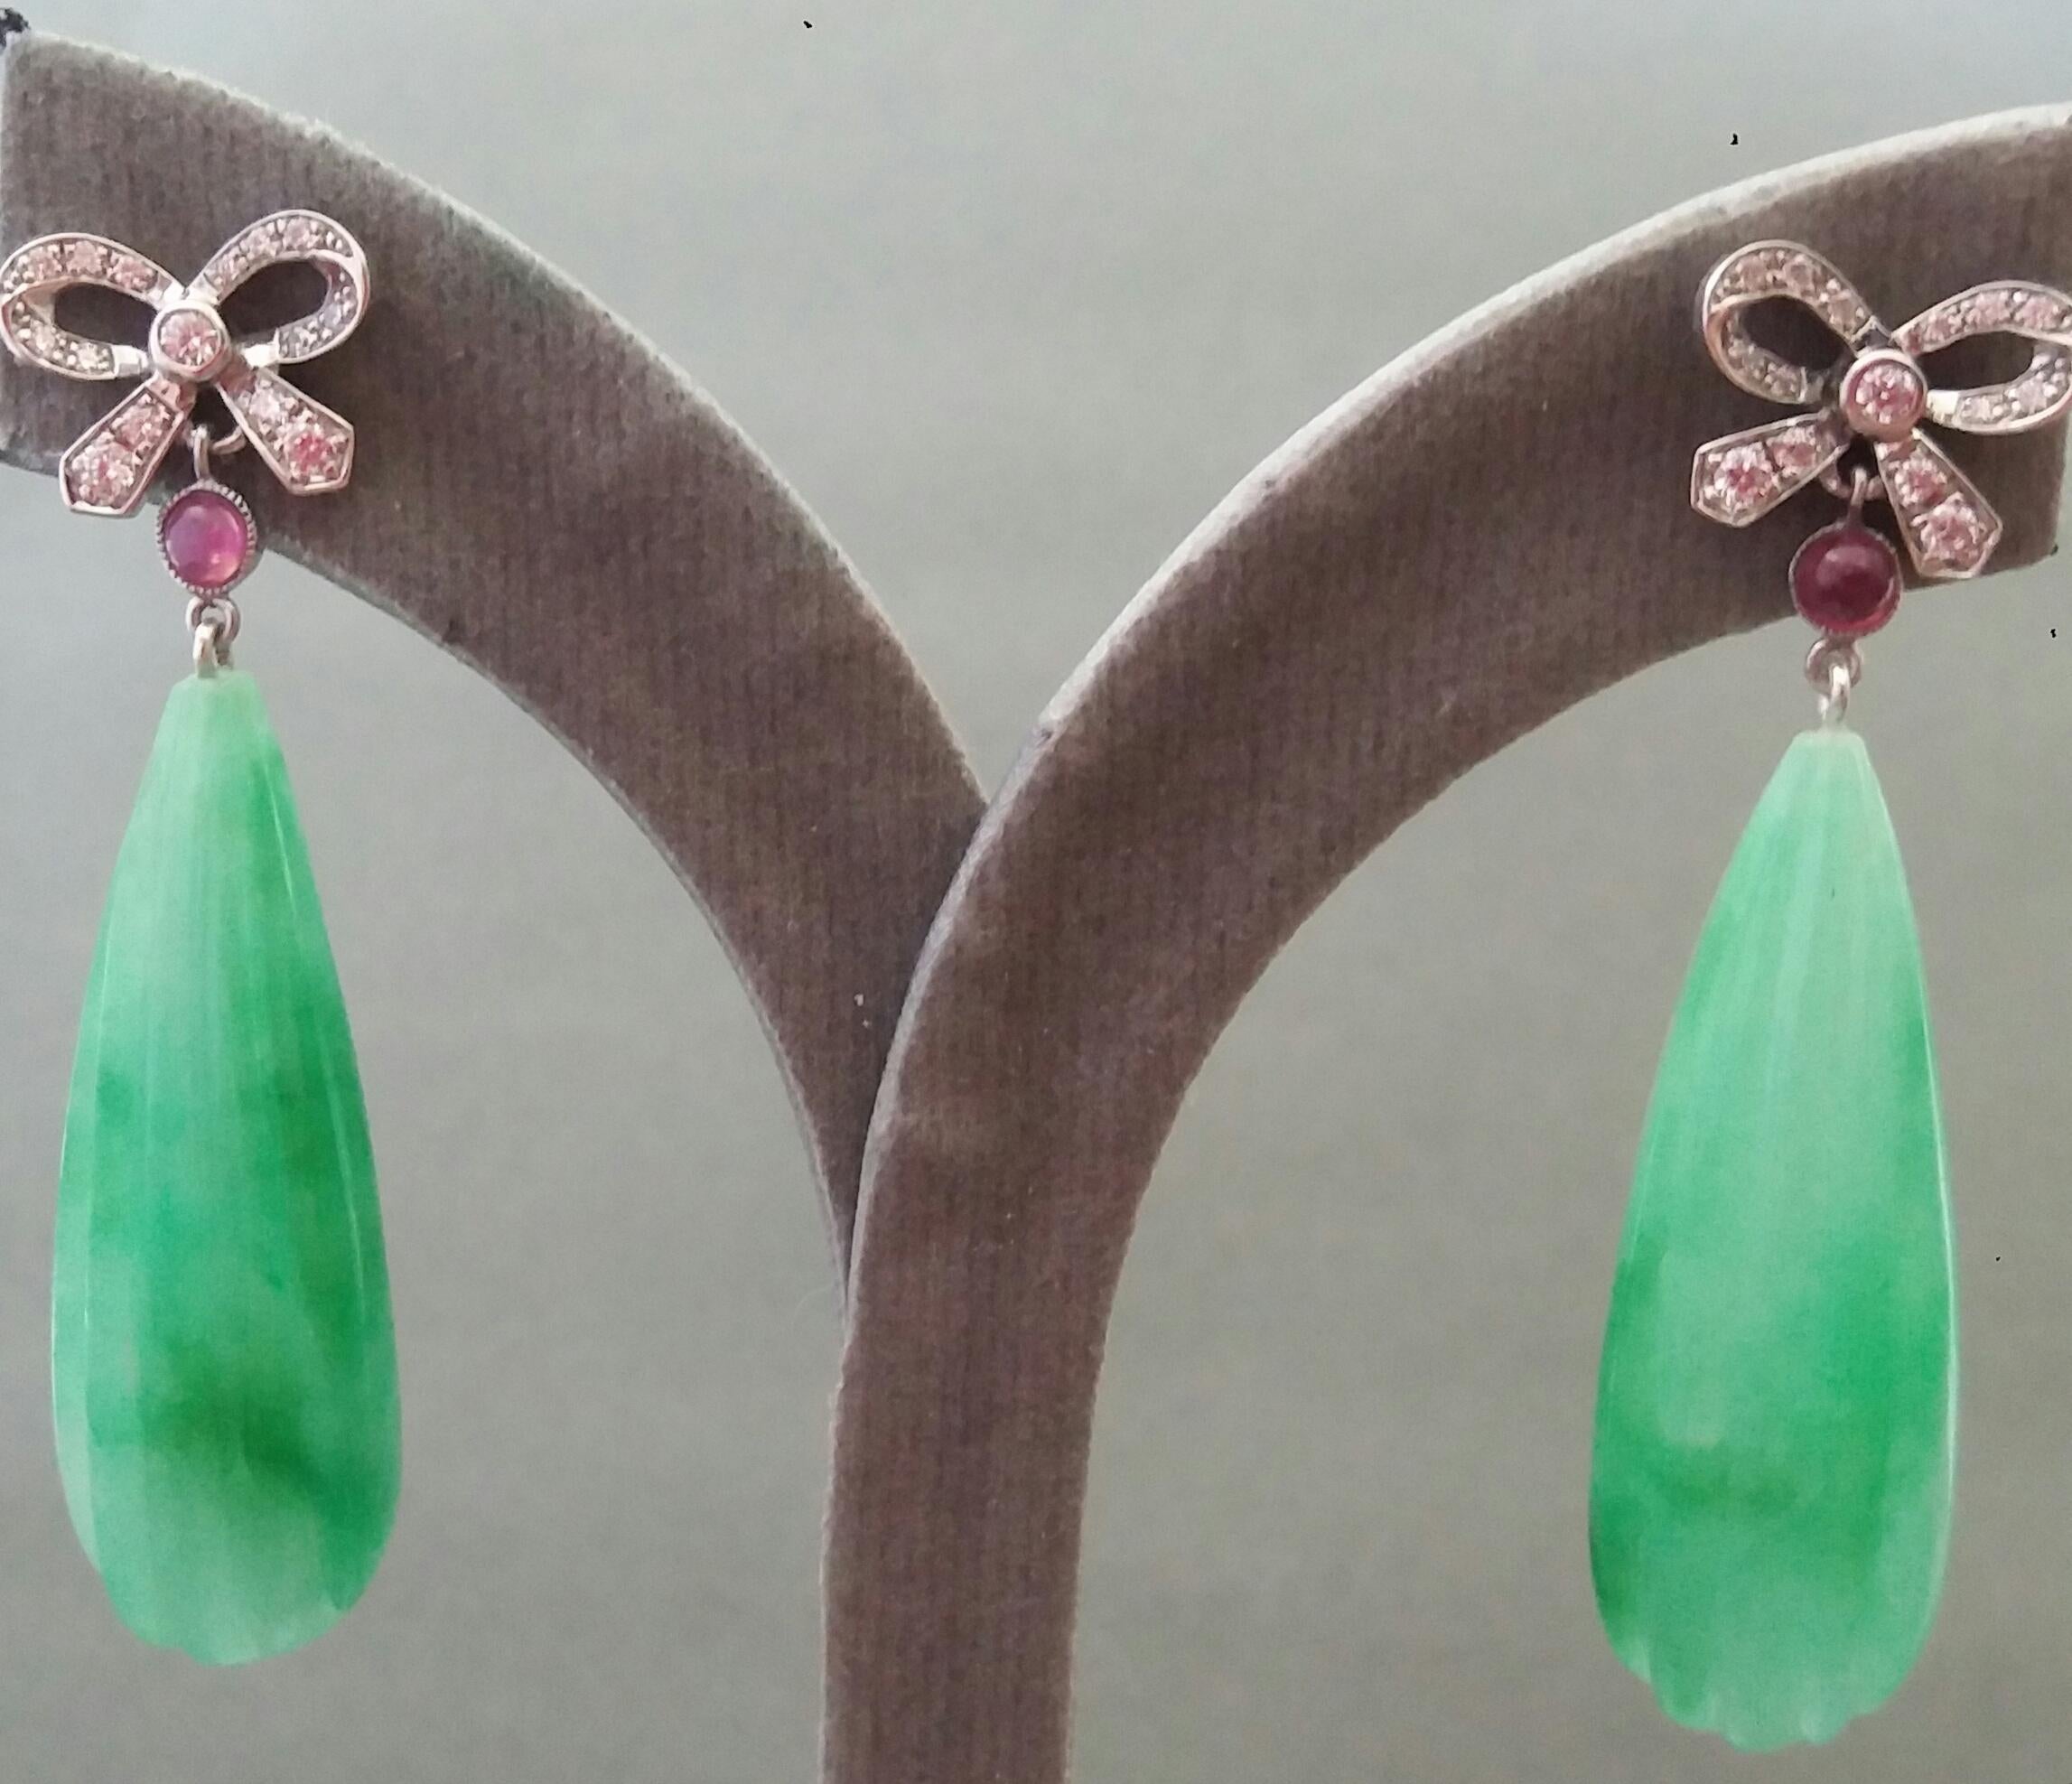 Art Deco Style 14k Gold And Diamonds Bows Rubies Carved Jade Dangle Earrings For Sale 3